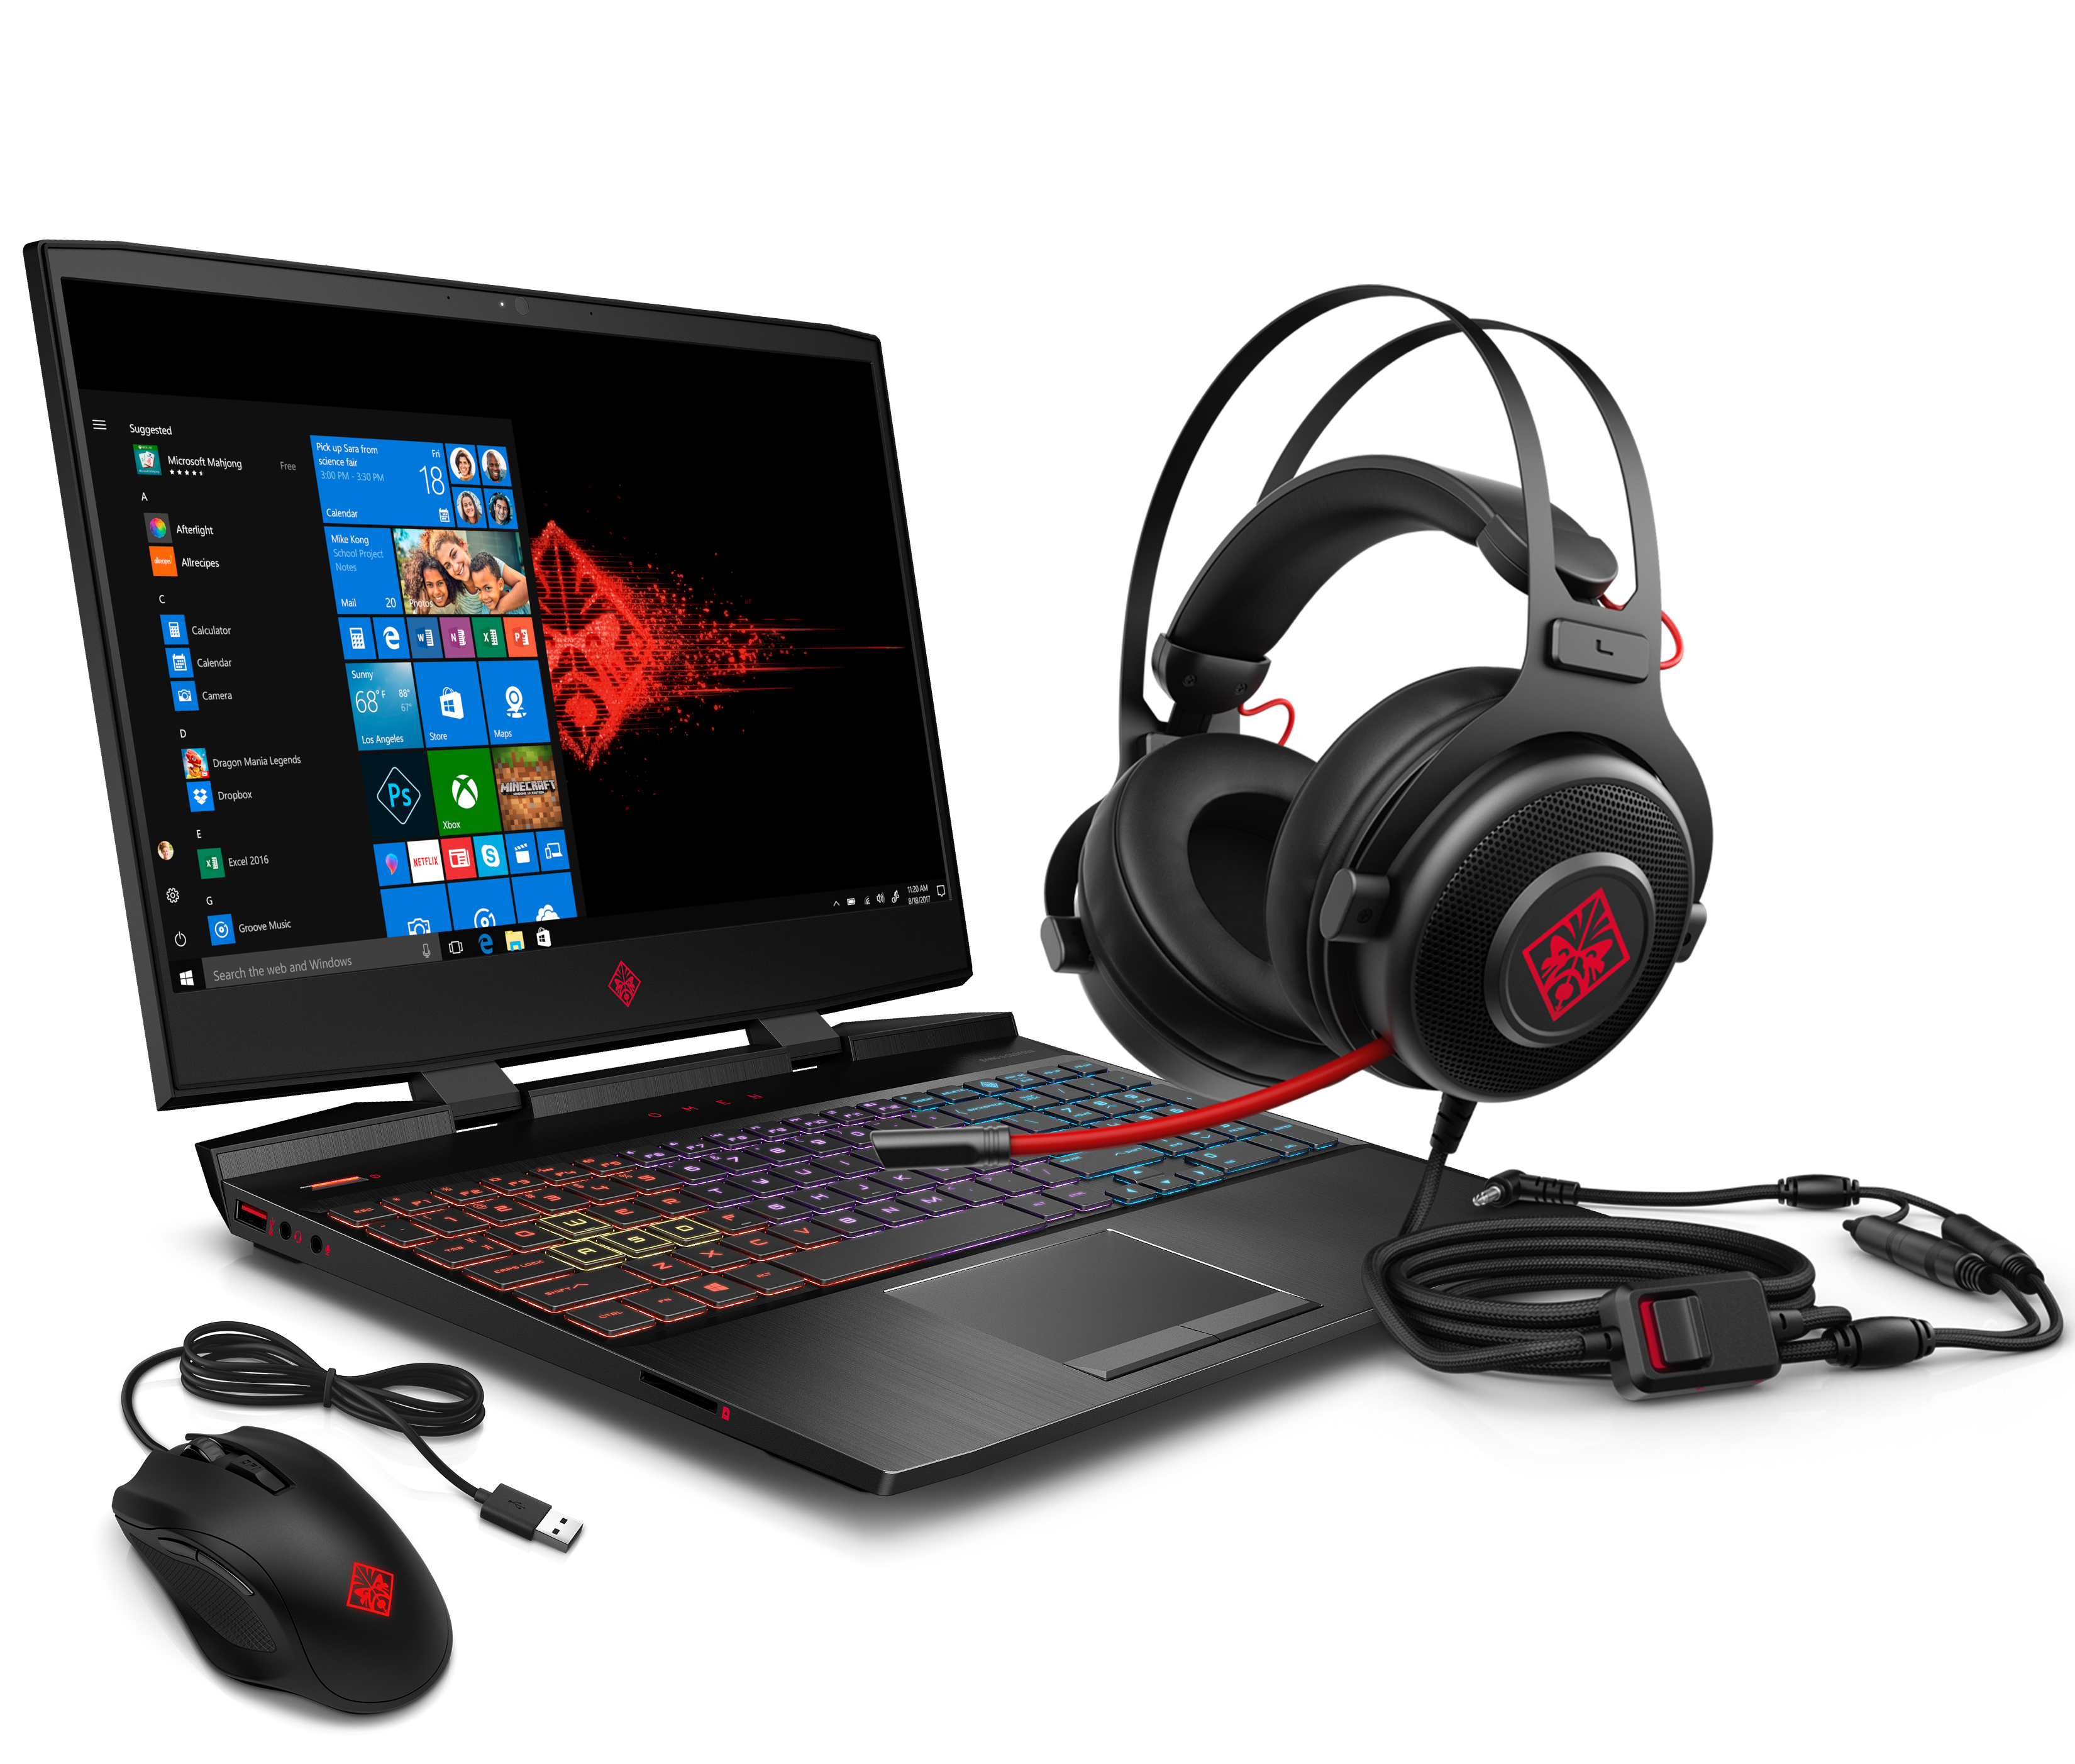 Omen by HP Gaming Laptop 15.6", Intel Core i7-9750H, NVIDIA GTX 1660Ti 6GB, 16GB RAM, 256GB SSD, Omen Headset and Mouse Included ($100 Value), 15-dc1088wm - image 1 of 9